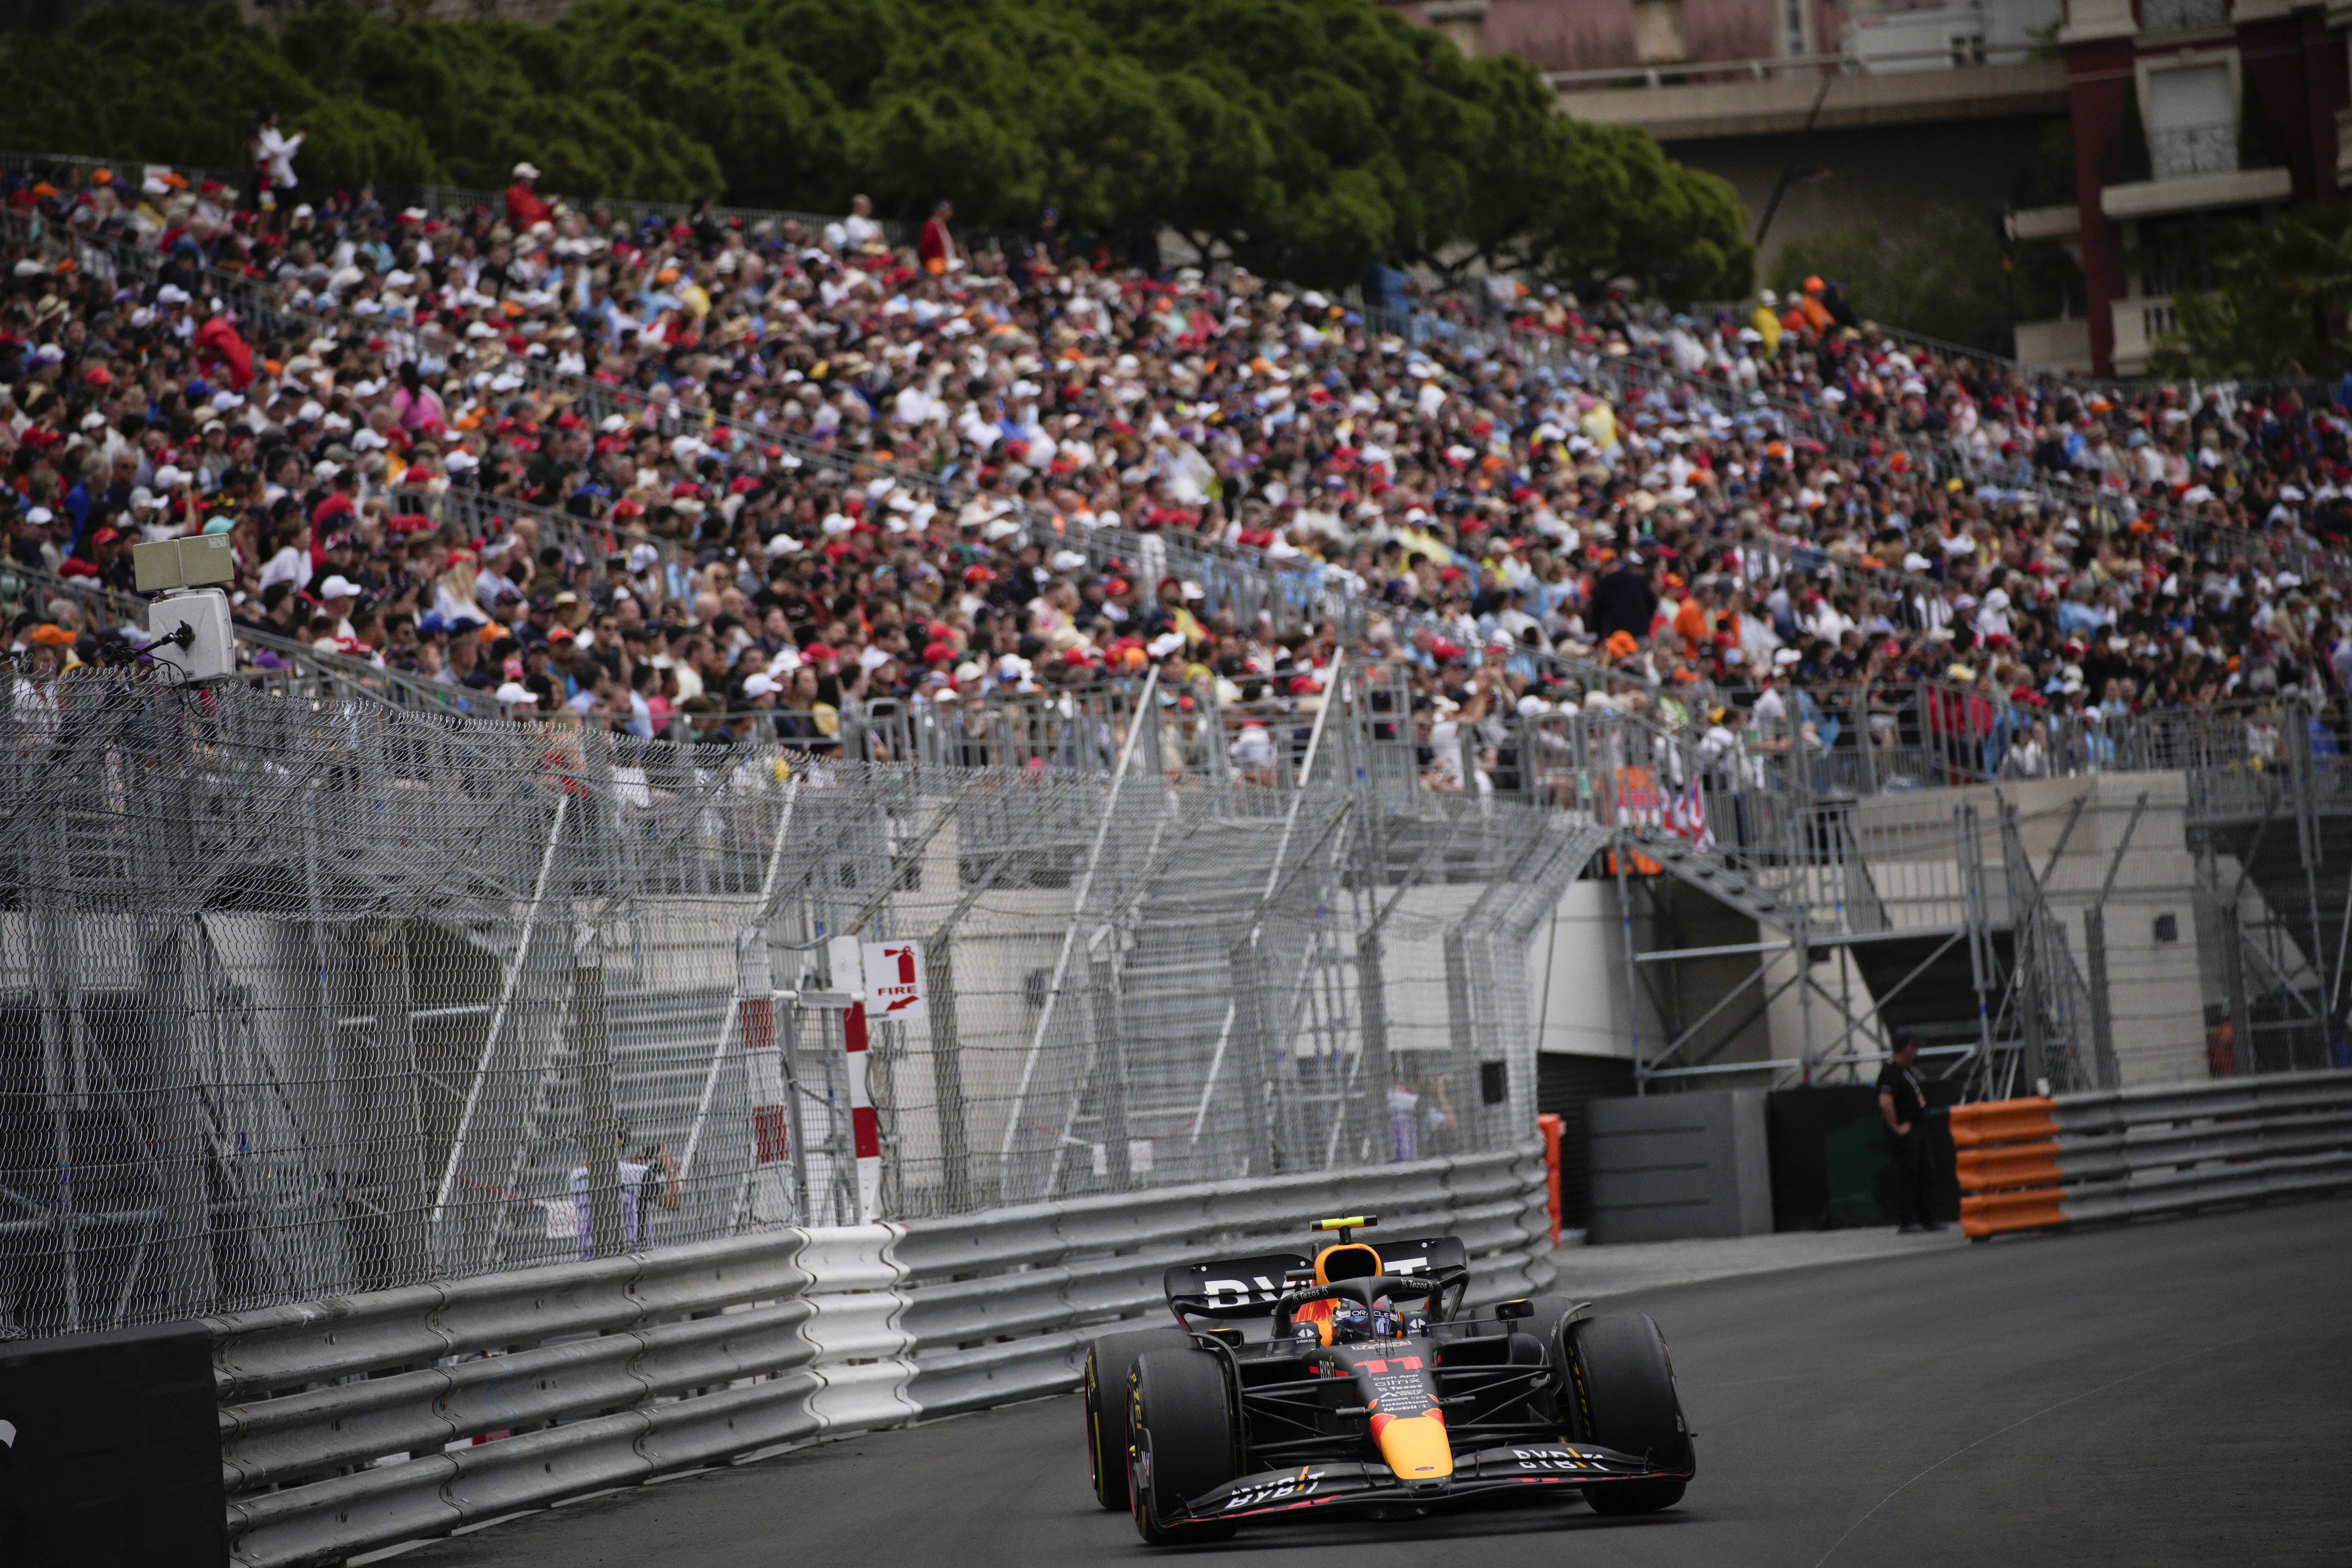 How to watch F1 Monaco Grand Prix Time, TV channel, free live stream, betting odds